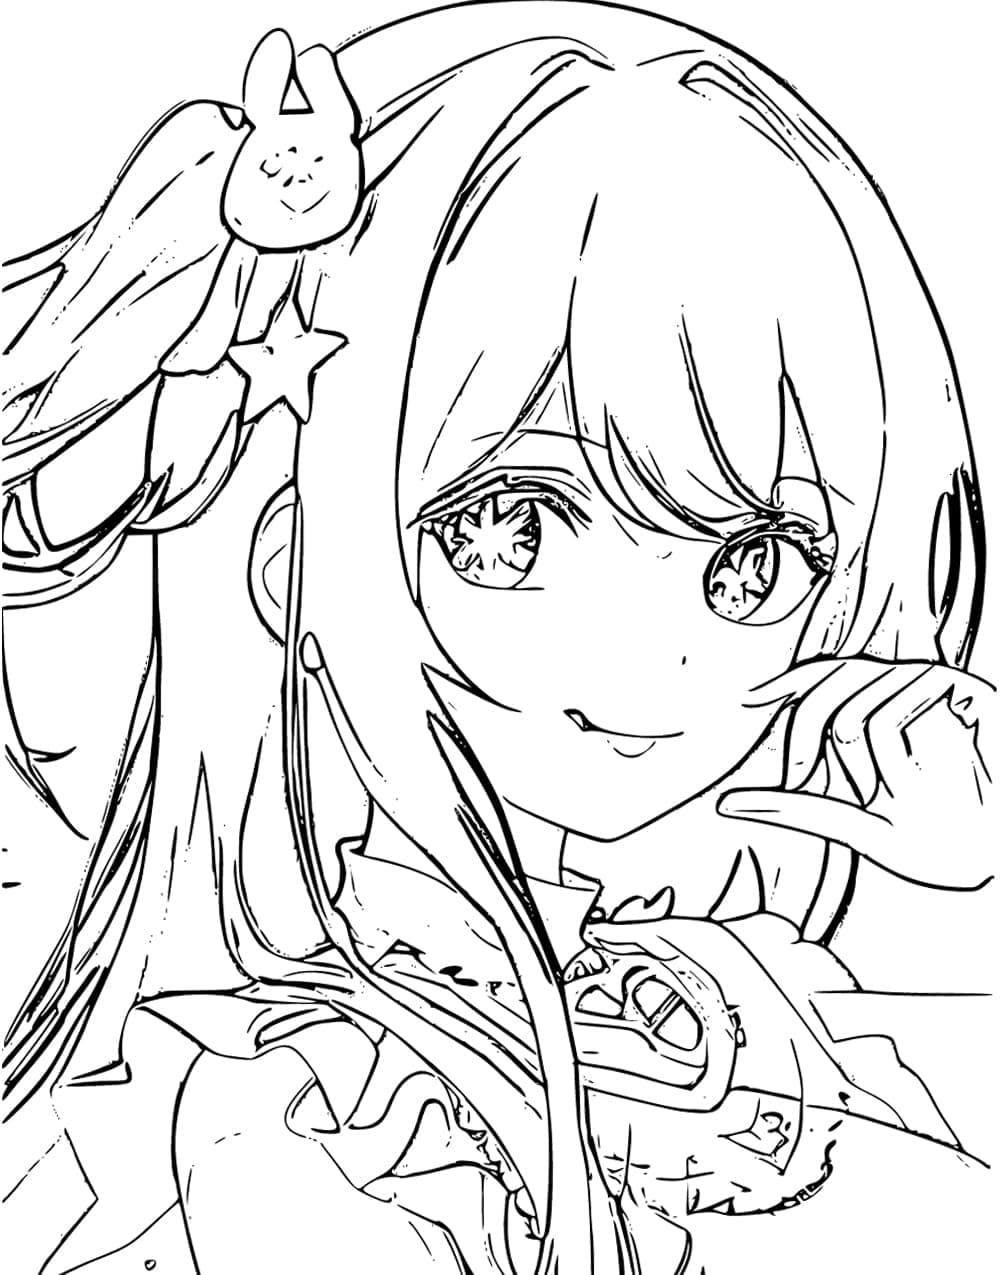 Lovely Ai Hoshino coloring page - Download, Print or Color Online for Free